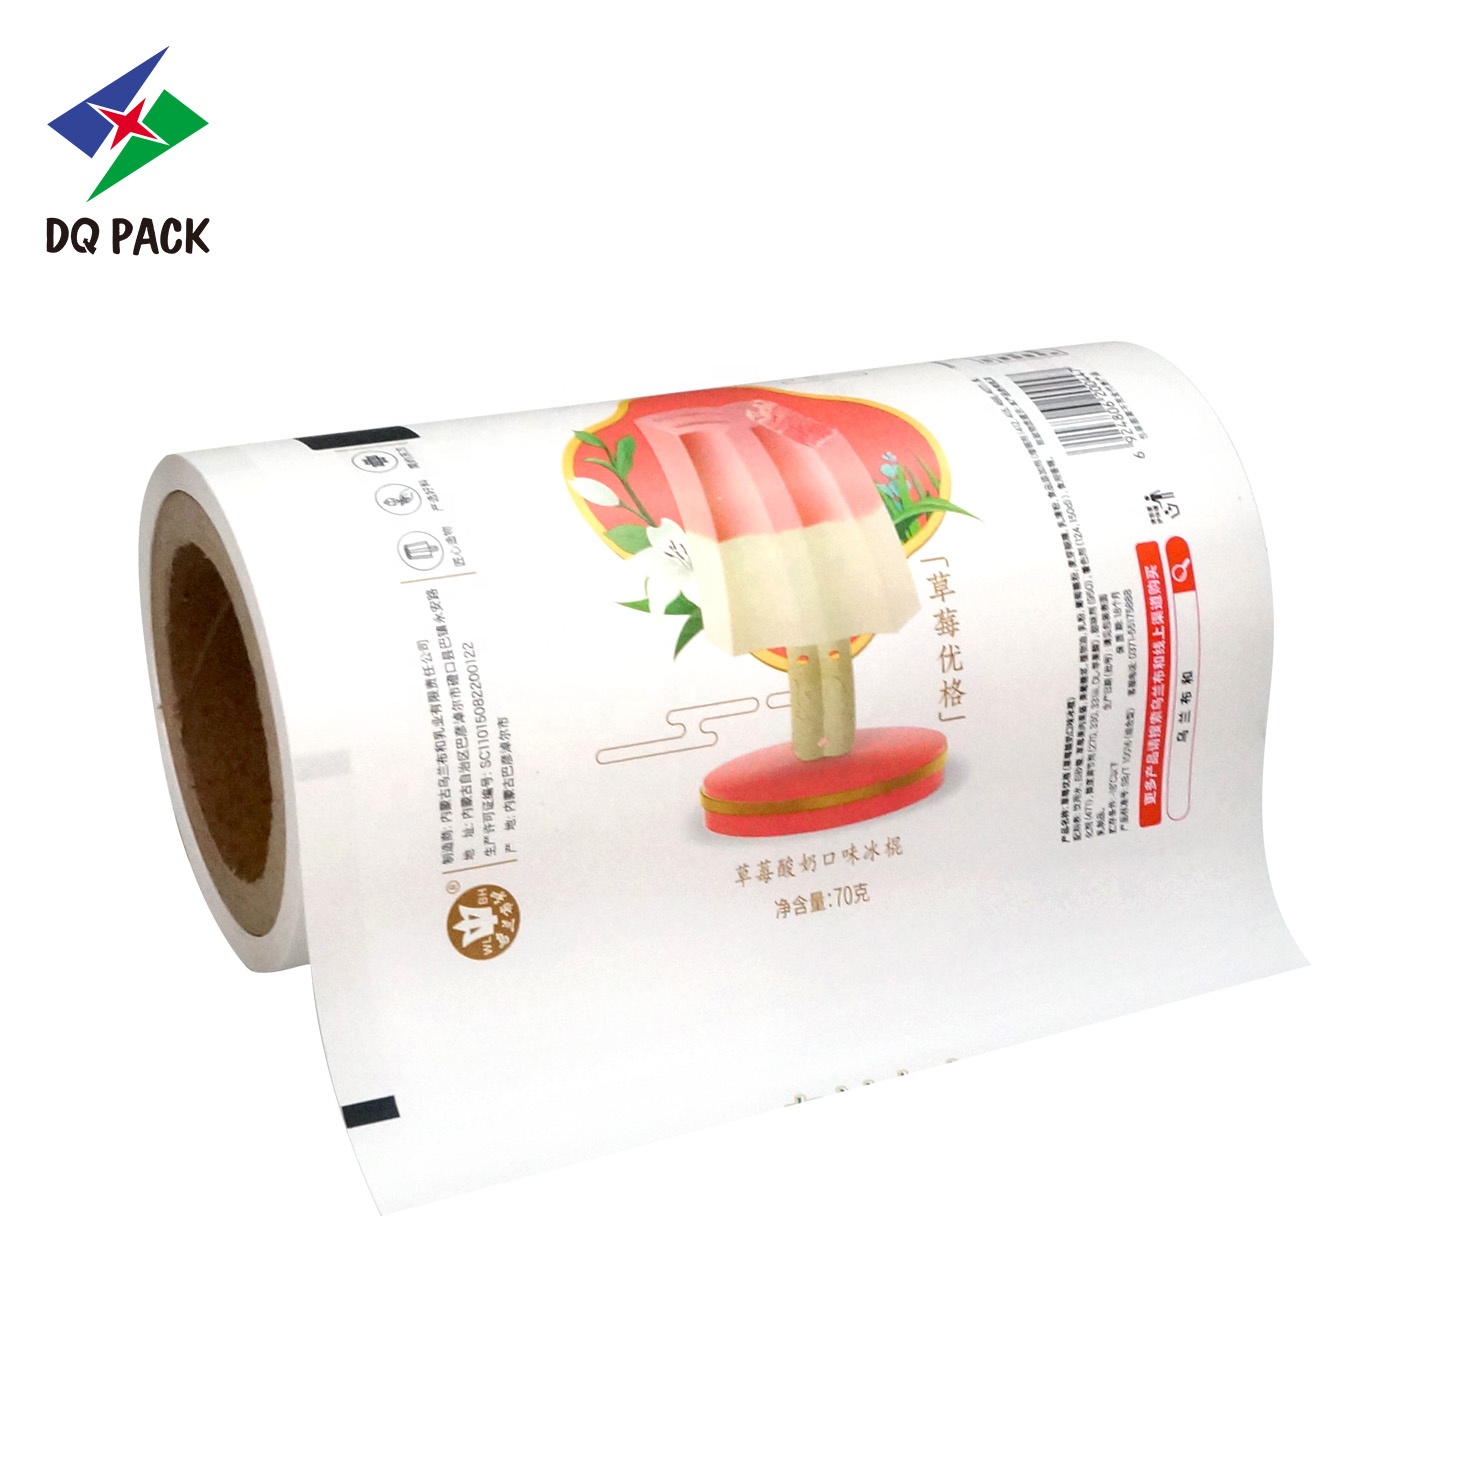 DQ PACK China Packaging Supplier  Customized Printed Sugar snack ice cream Packaging Film